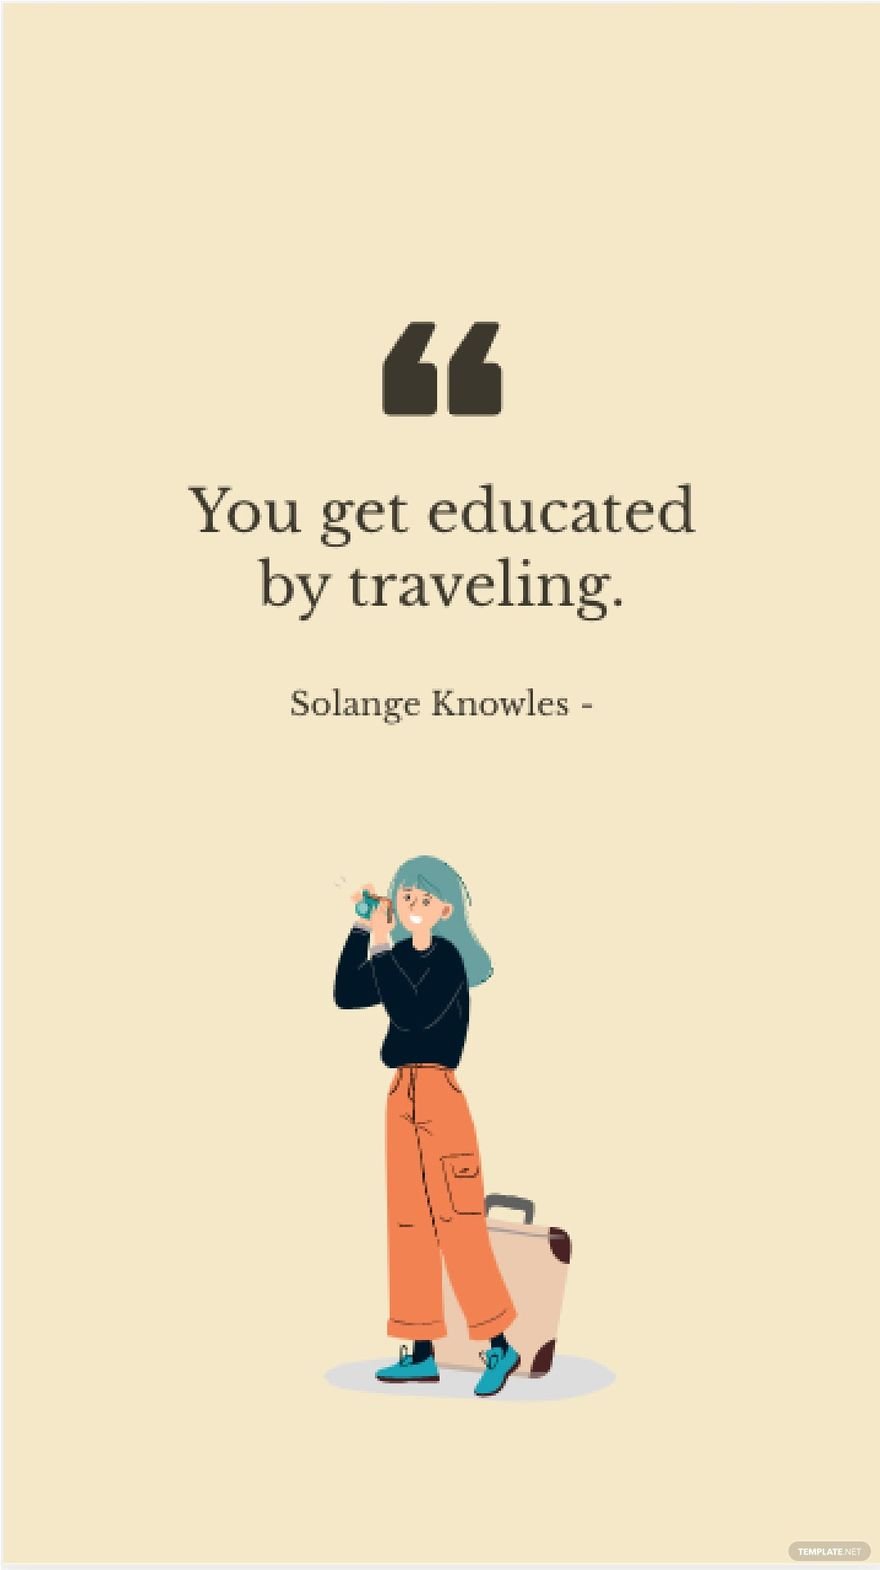 Free Solange Knowles - You get educated by traveling. in JPG